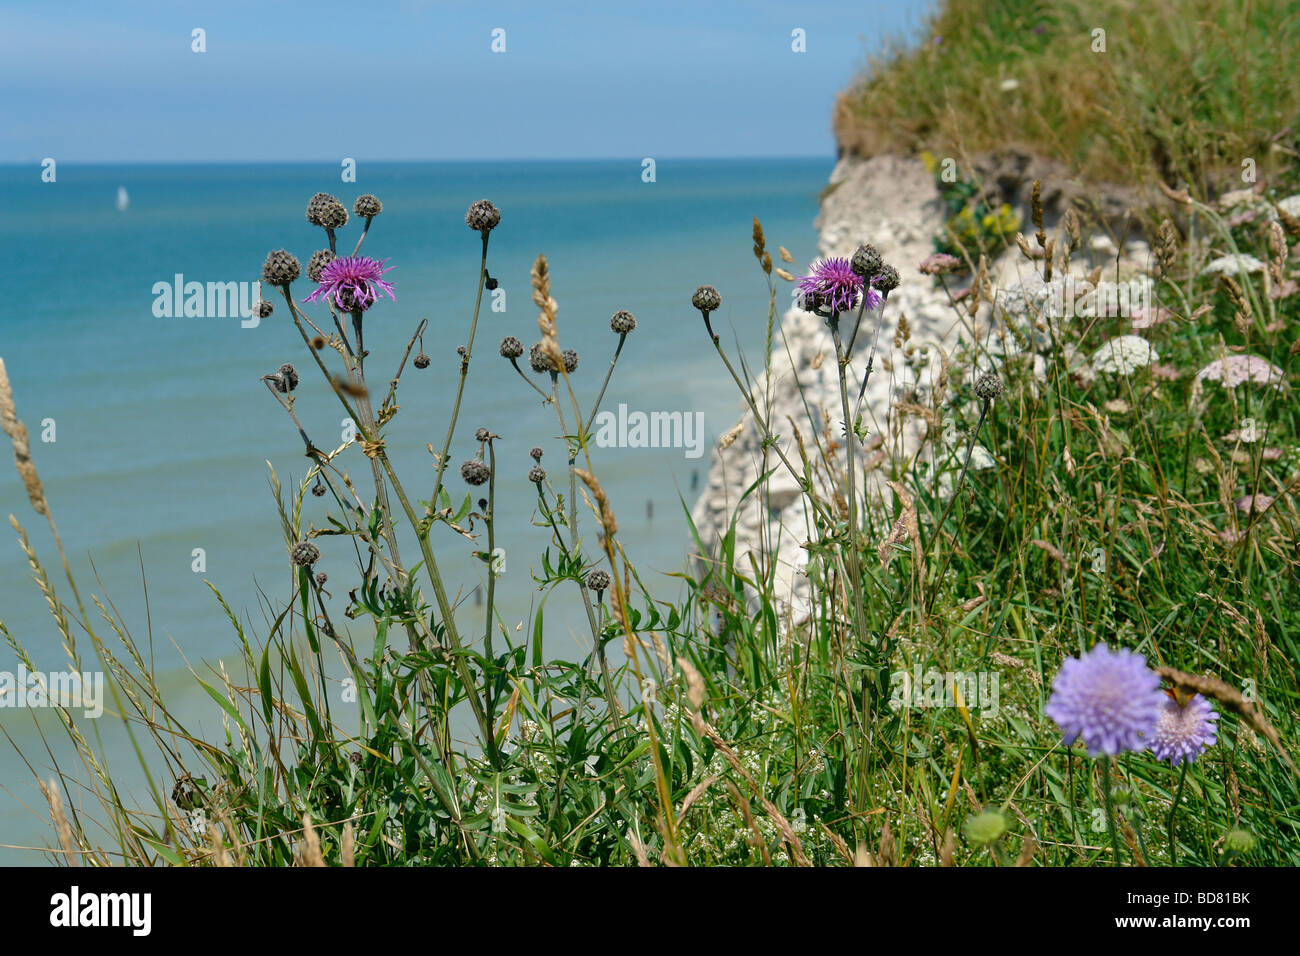 Image taken from the cliff top of the chalk cliffs that line the norhern coast of France between Boulogne and Calais The English Stock Photo